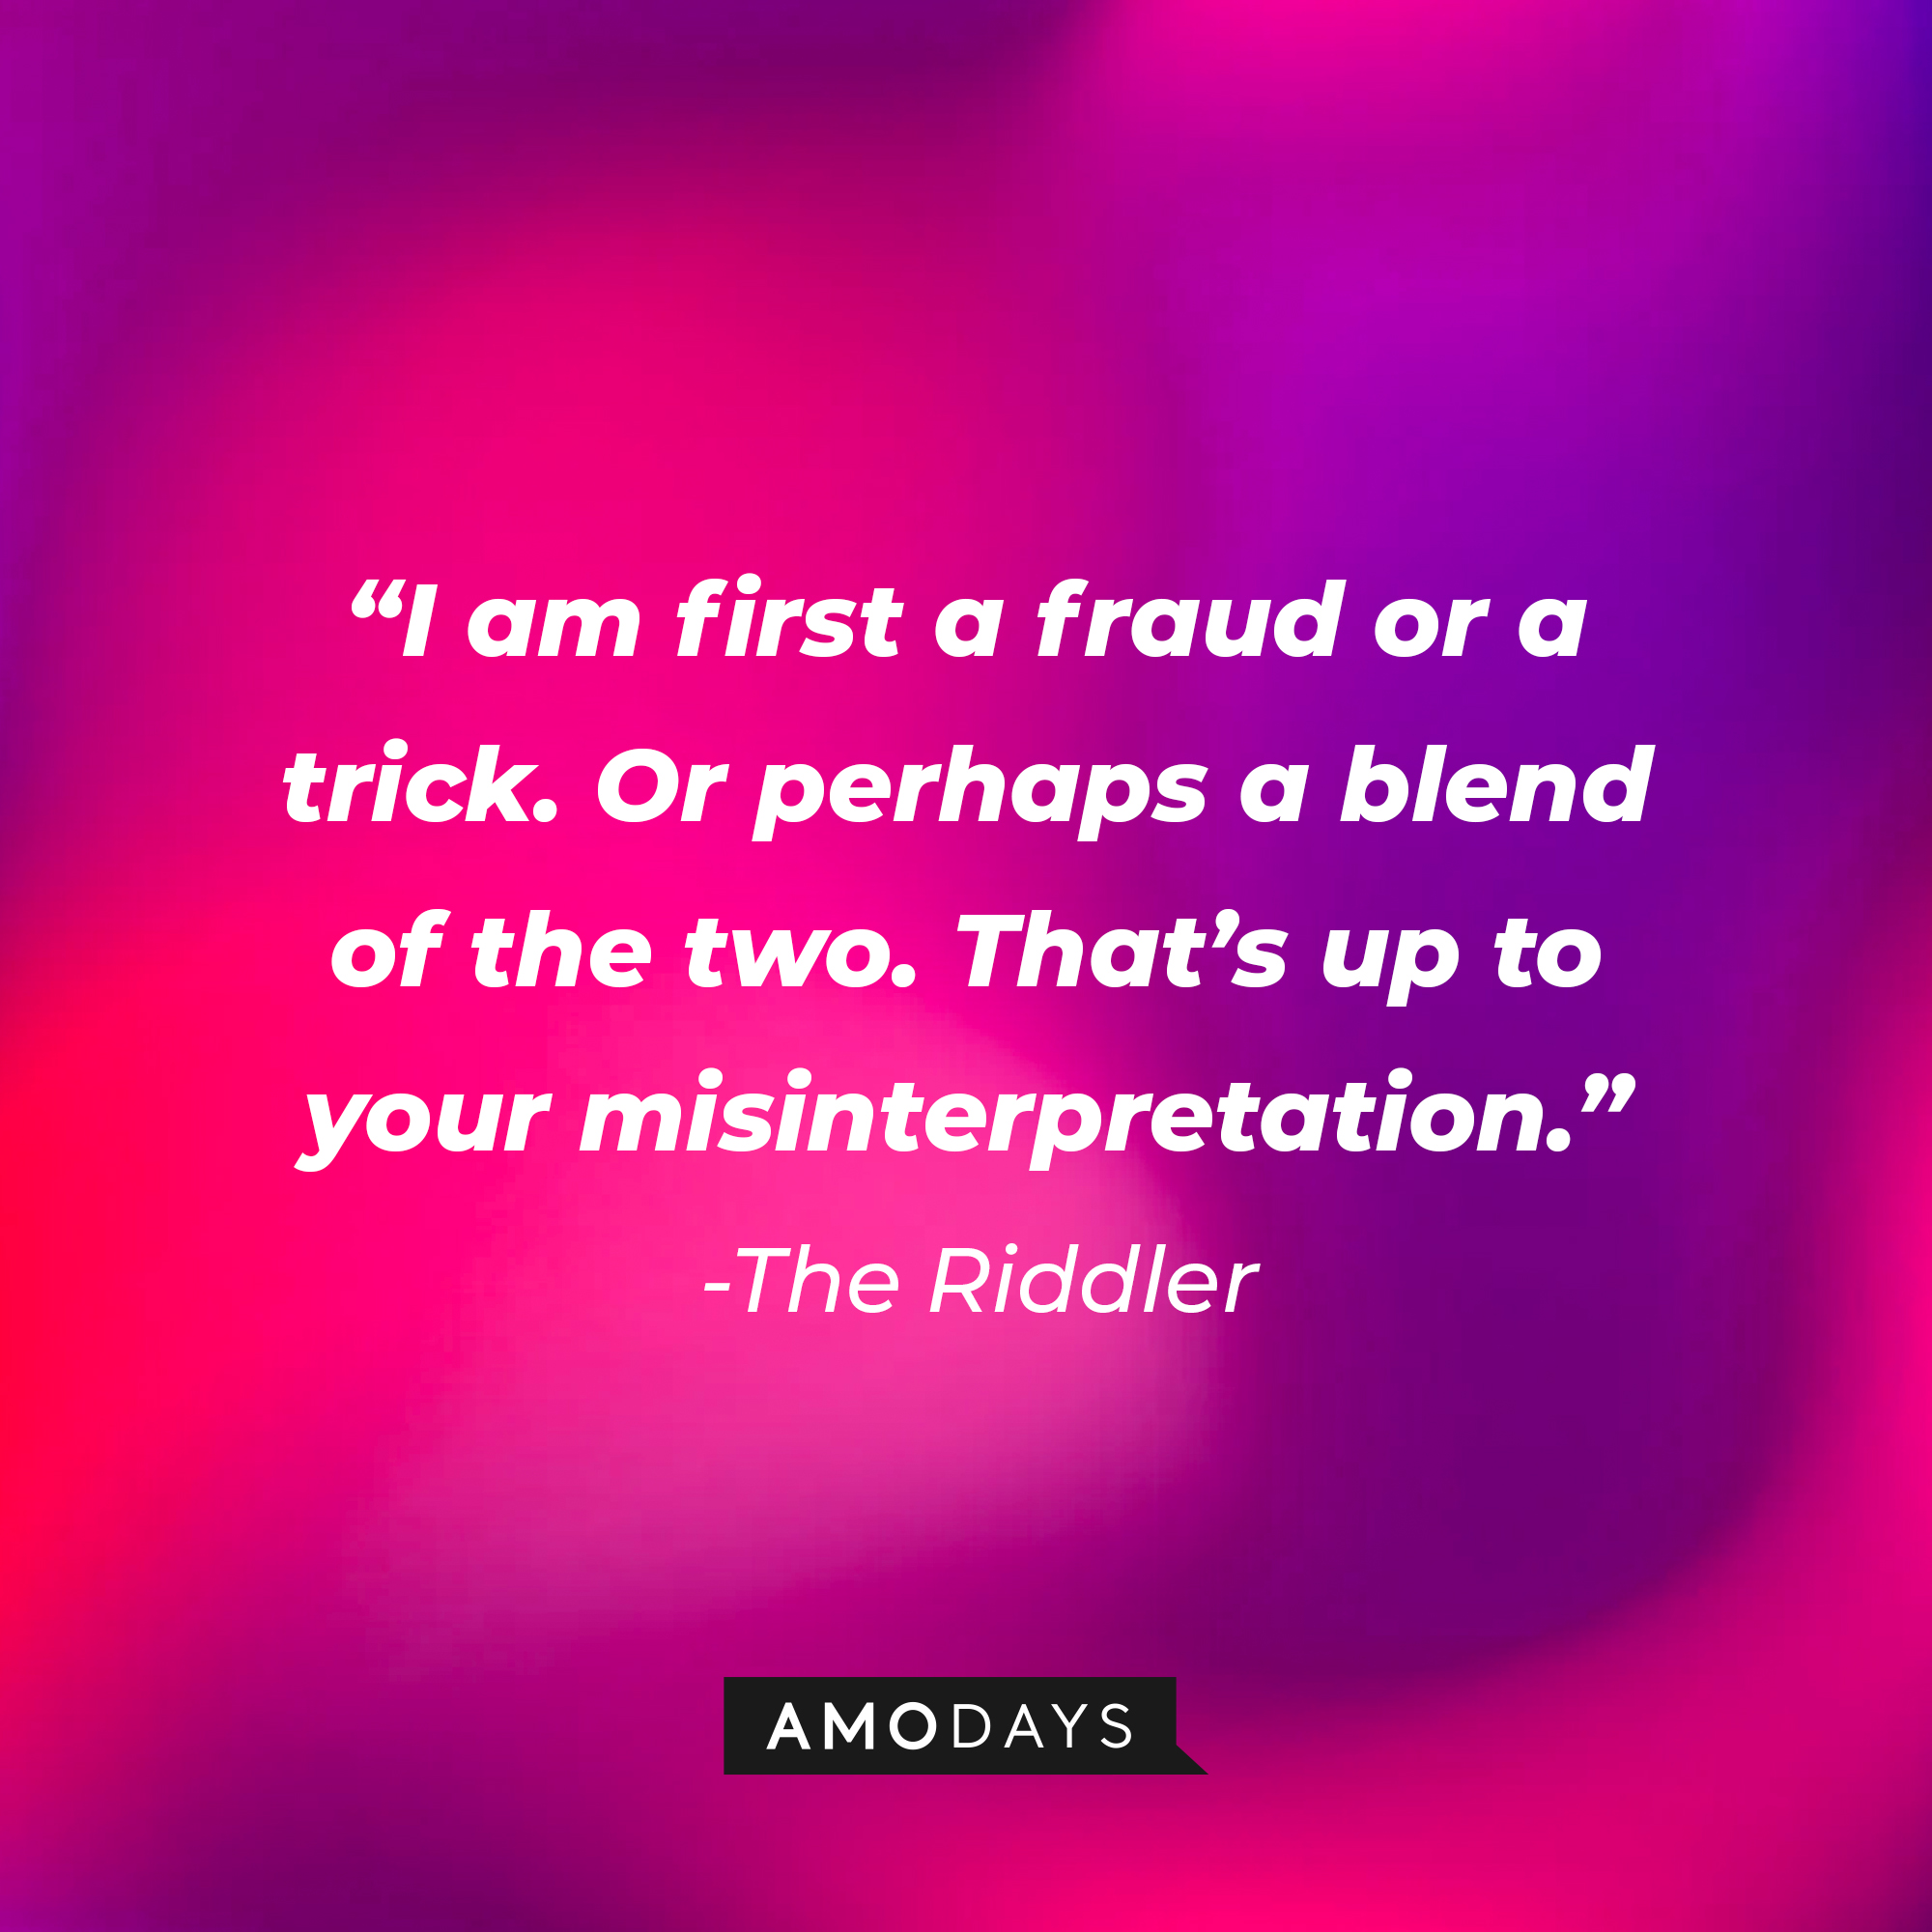 The Riddler's quote: “I am first a fraud or a trick. Or perhaps a blend of the two. That’s up to your misinterpretation.” | Amodays